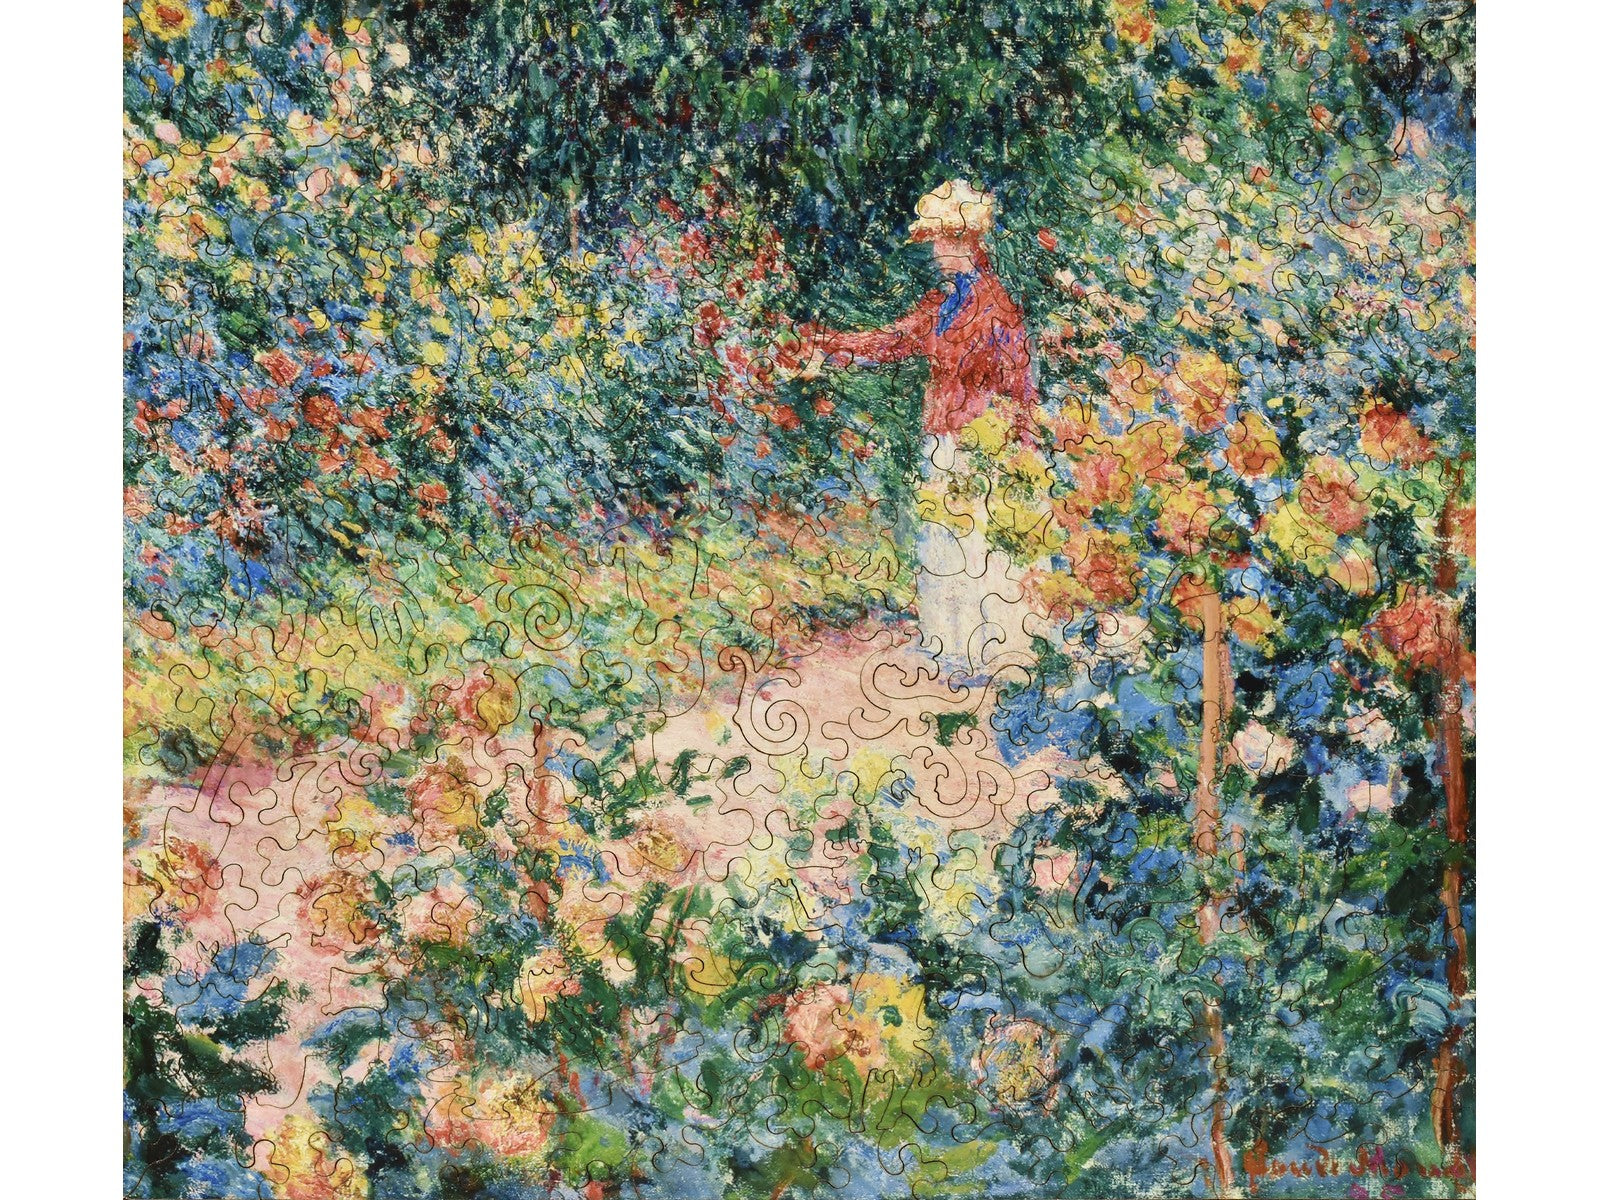 The front of the puzzle, Garden at Giverny, which shows a person walking in a colorful garden.